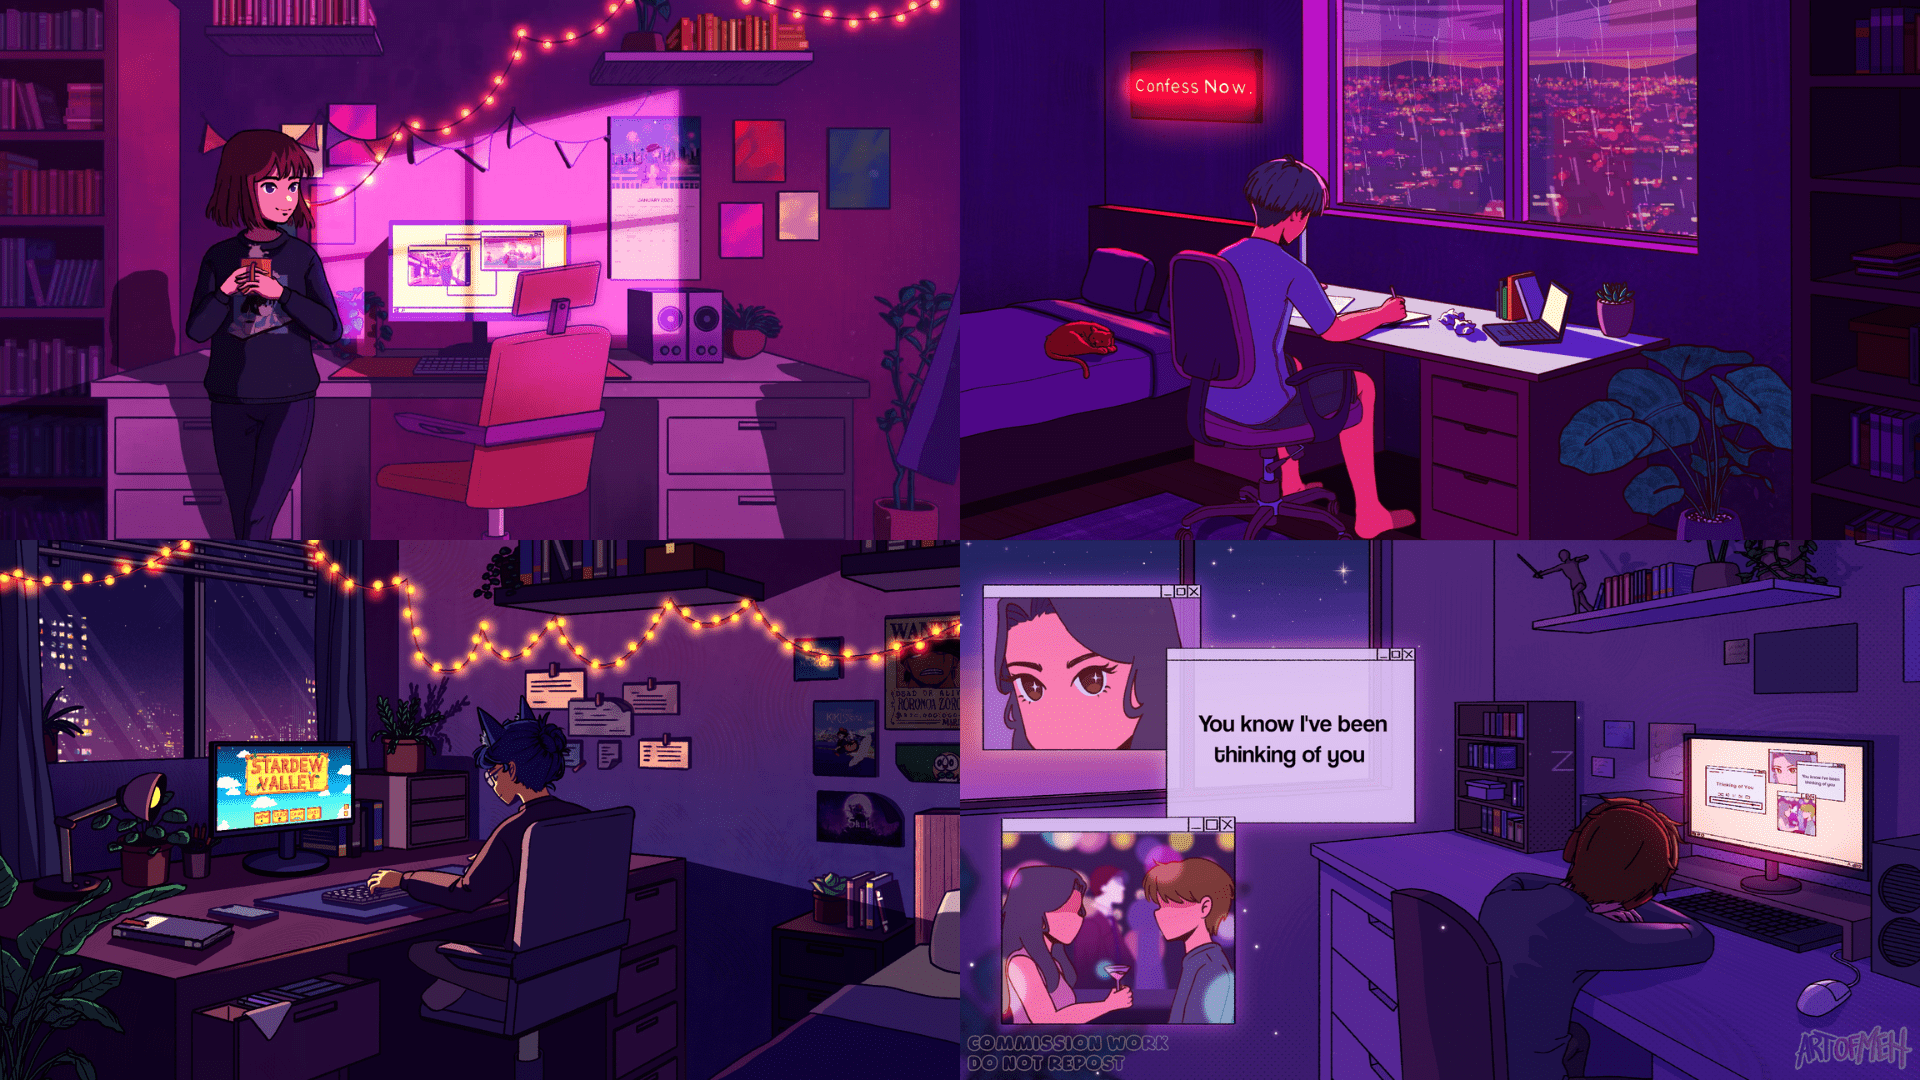 A digital art piece that shows a purple-lit room with a bed, a desk with a computer, and a cat. There are two people in the room, one on the bed and one at the desk. The cat is standing on the desk, looking at the person on the bed. The person at the desk is typing on a computer, and there are two screens open. The screens show a person looking at the camera and a speech bubble that says 